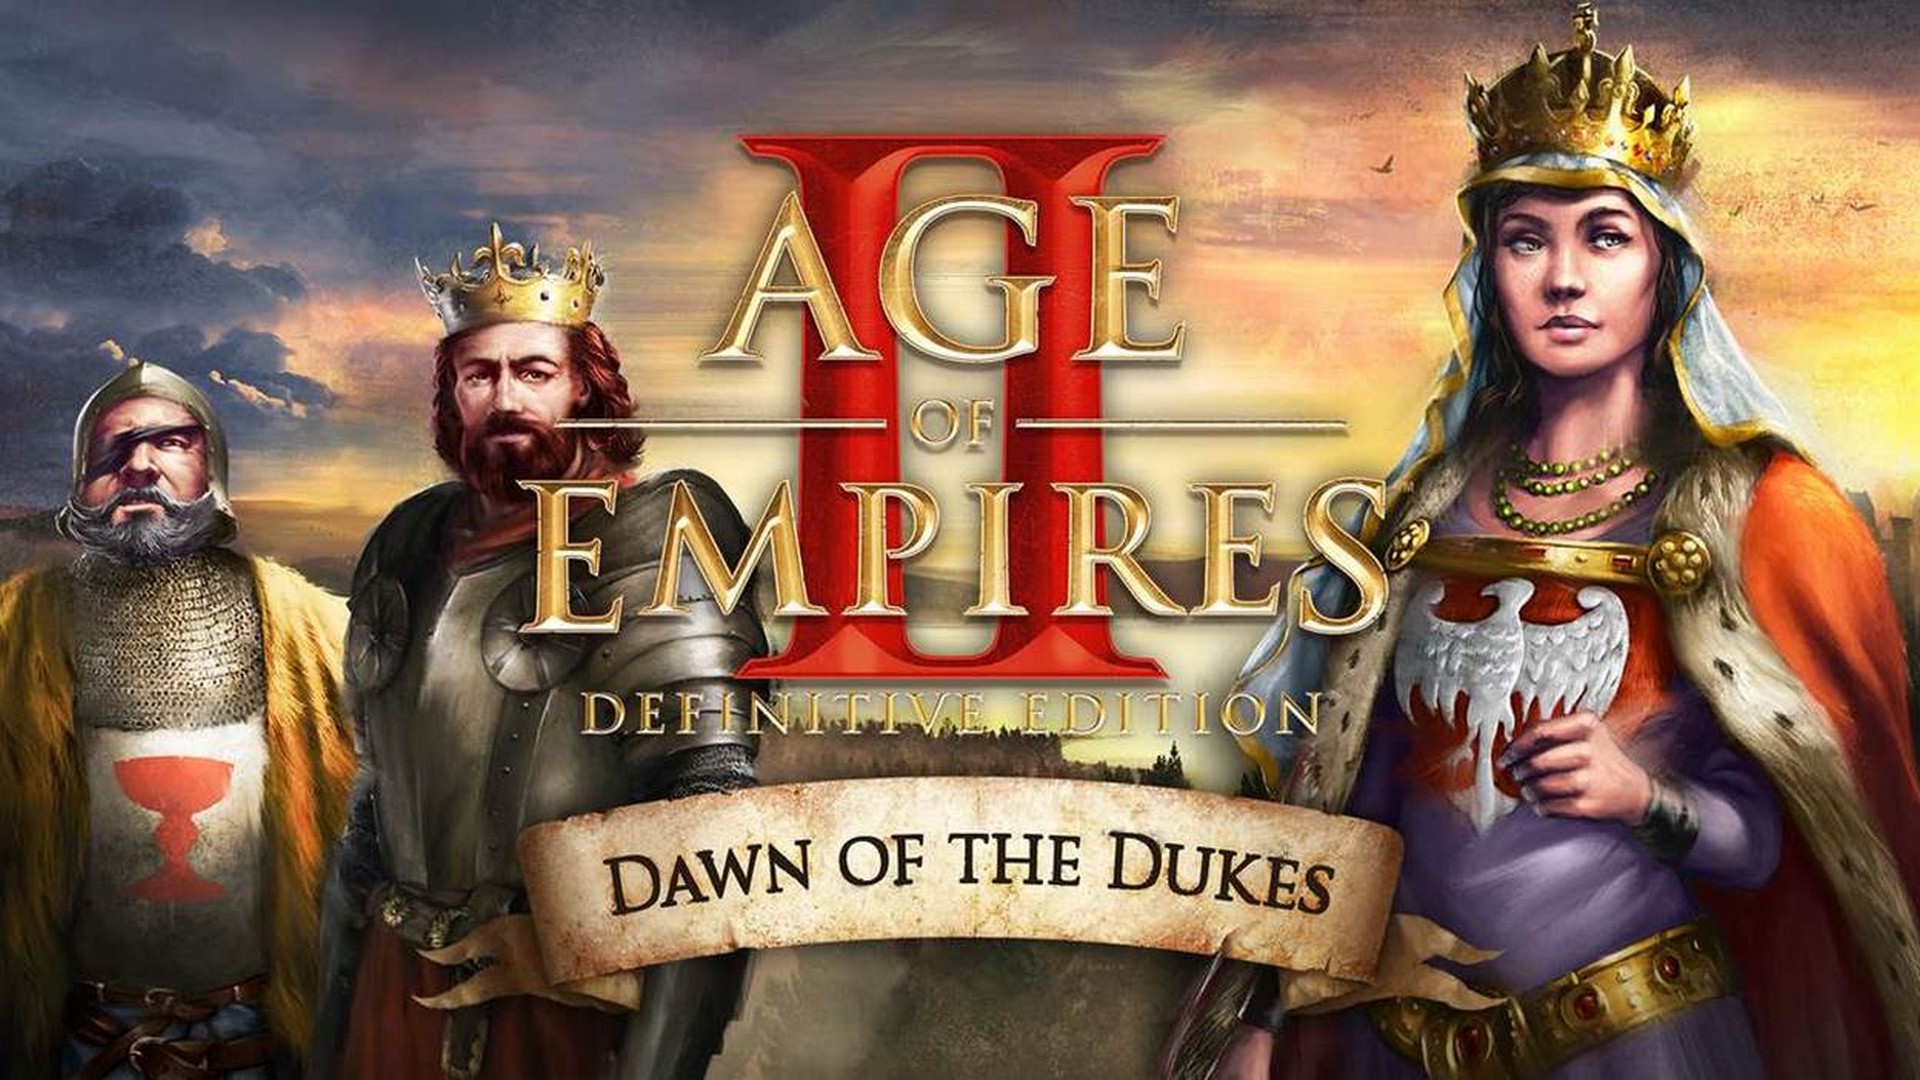 The Dawn Of The Dukes Have Arrived In Age Of Empires II: Definitive Edition